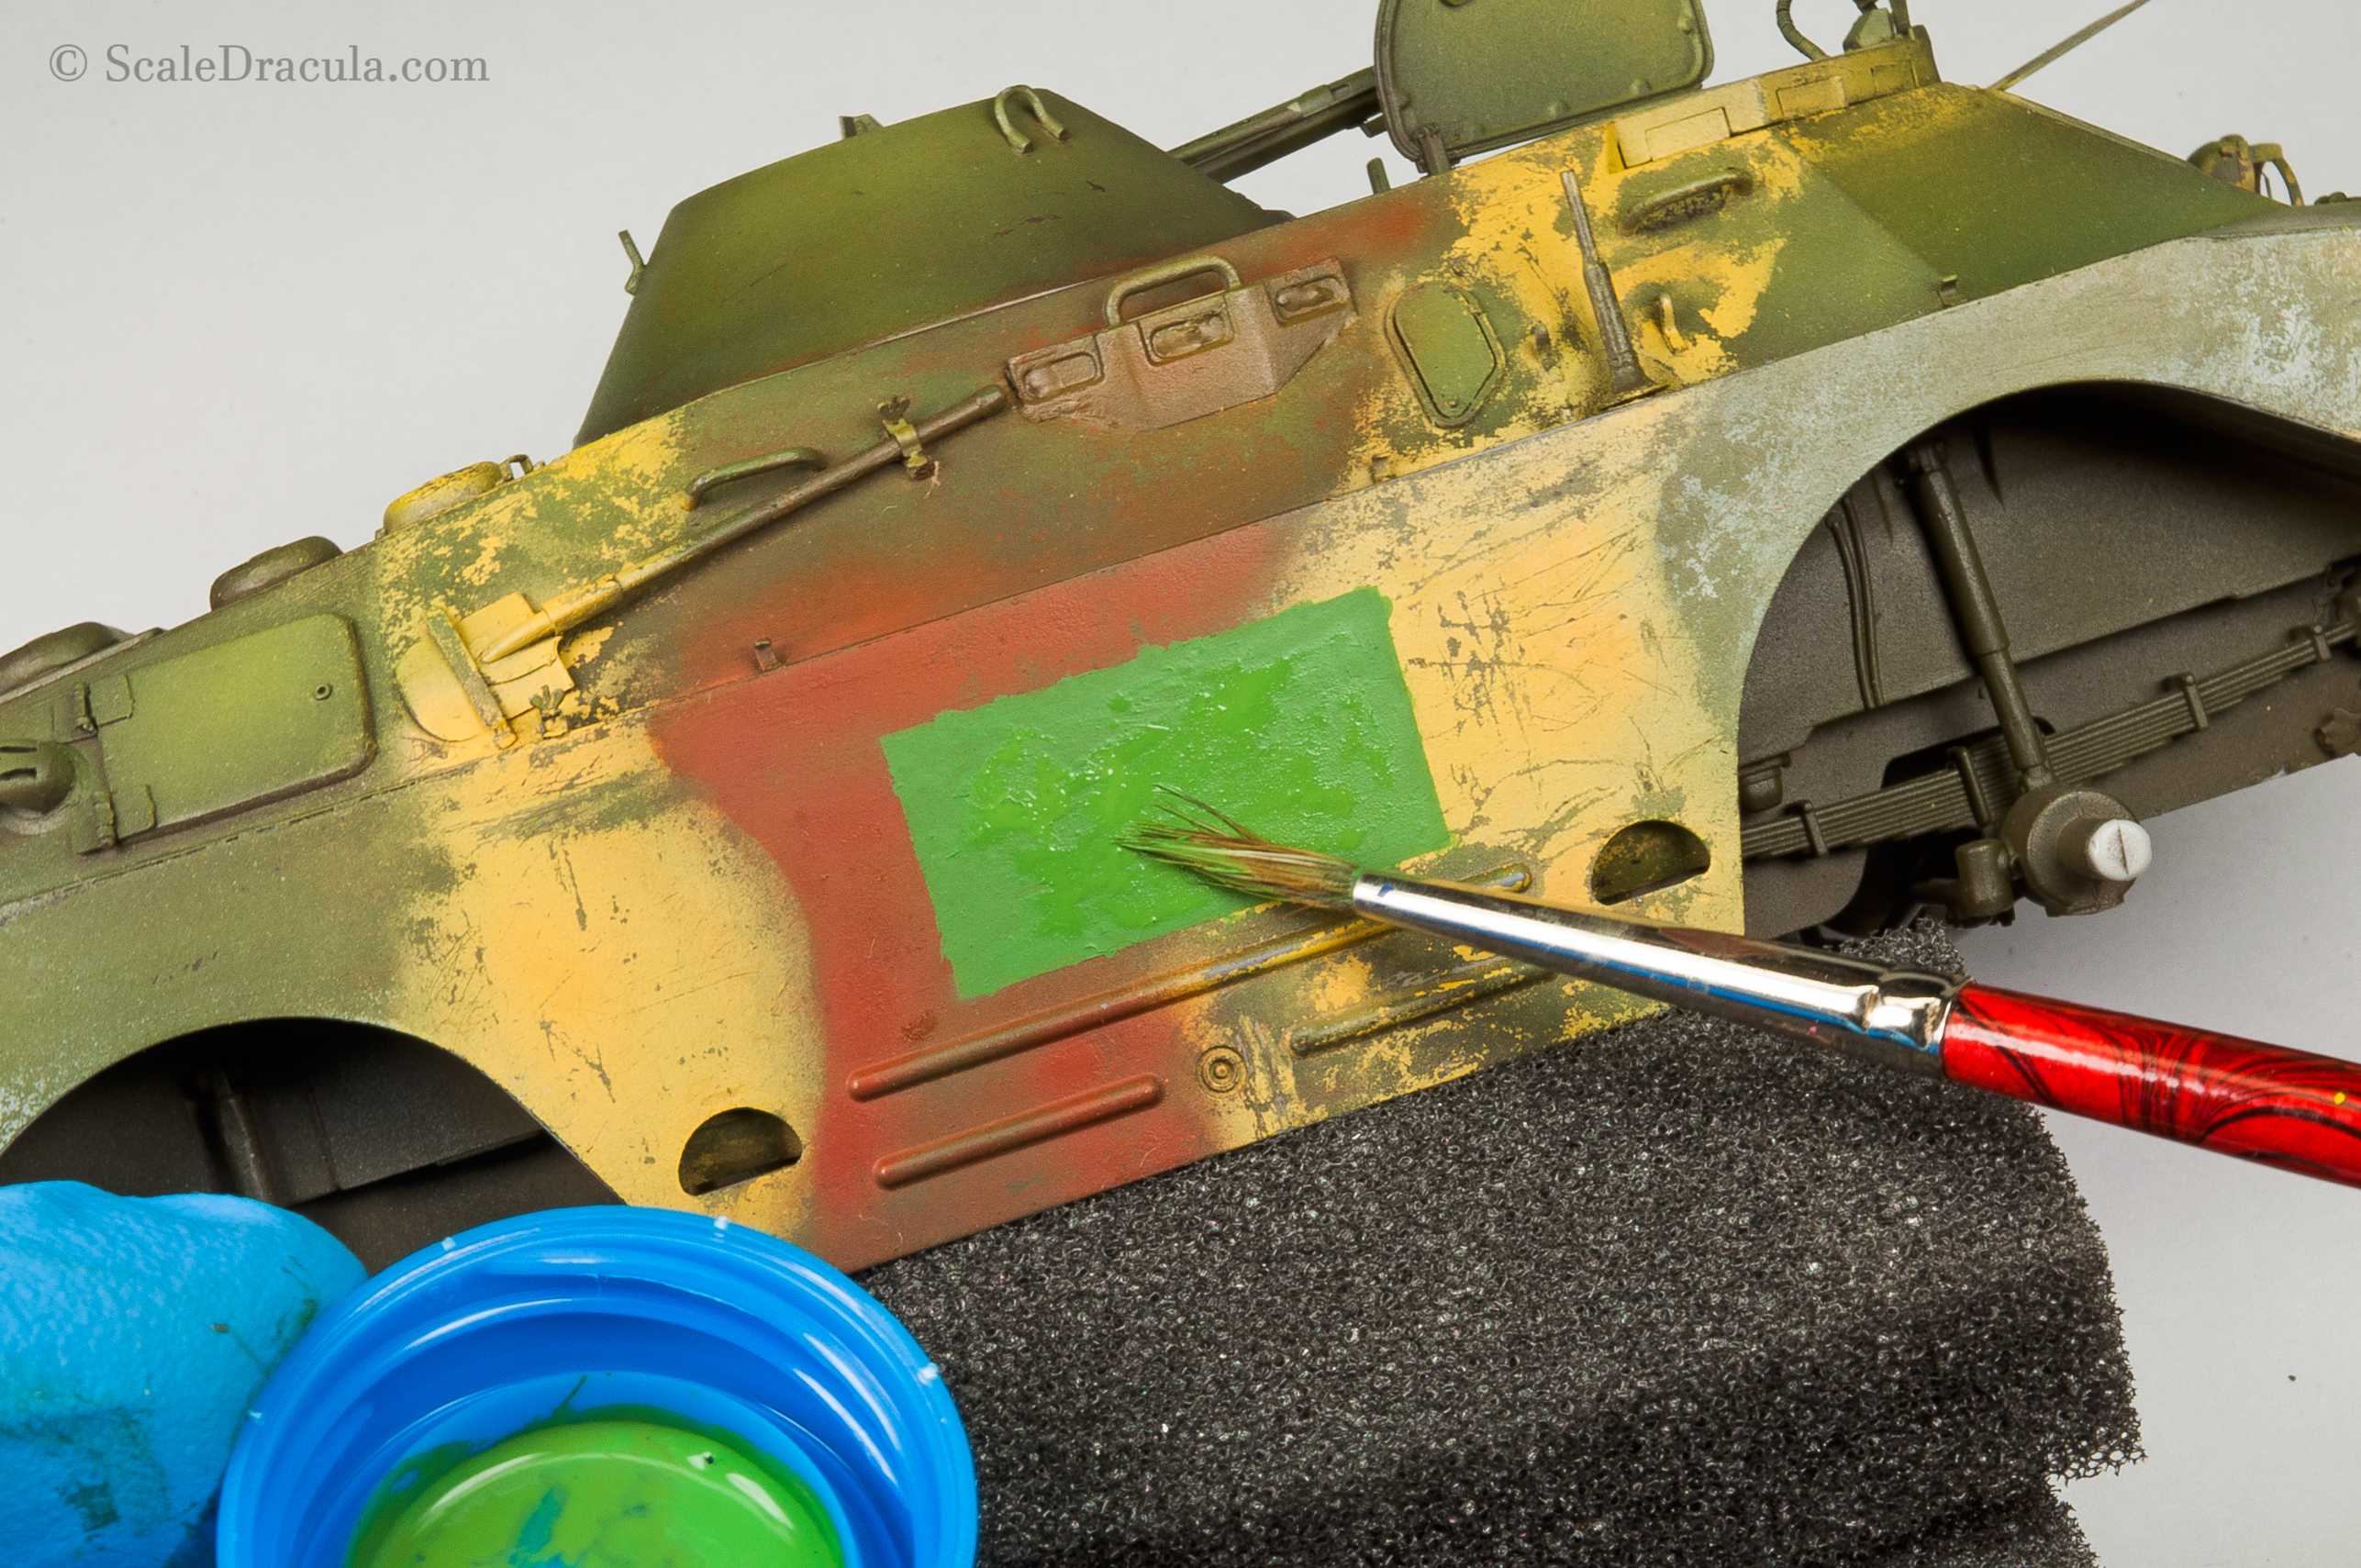 Acrylic paint thickened with talcum powder, BRDM-2 by Trumpeter